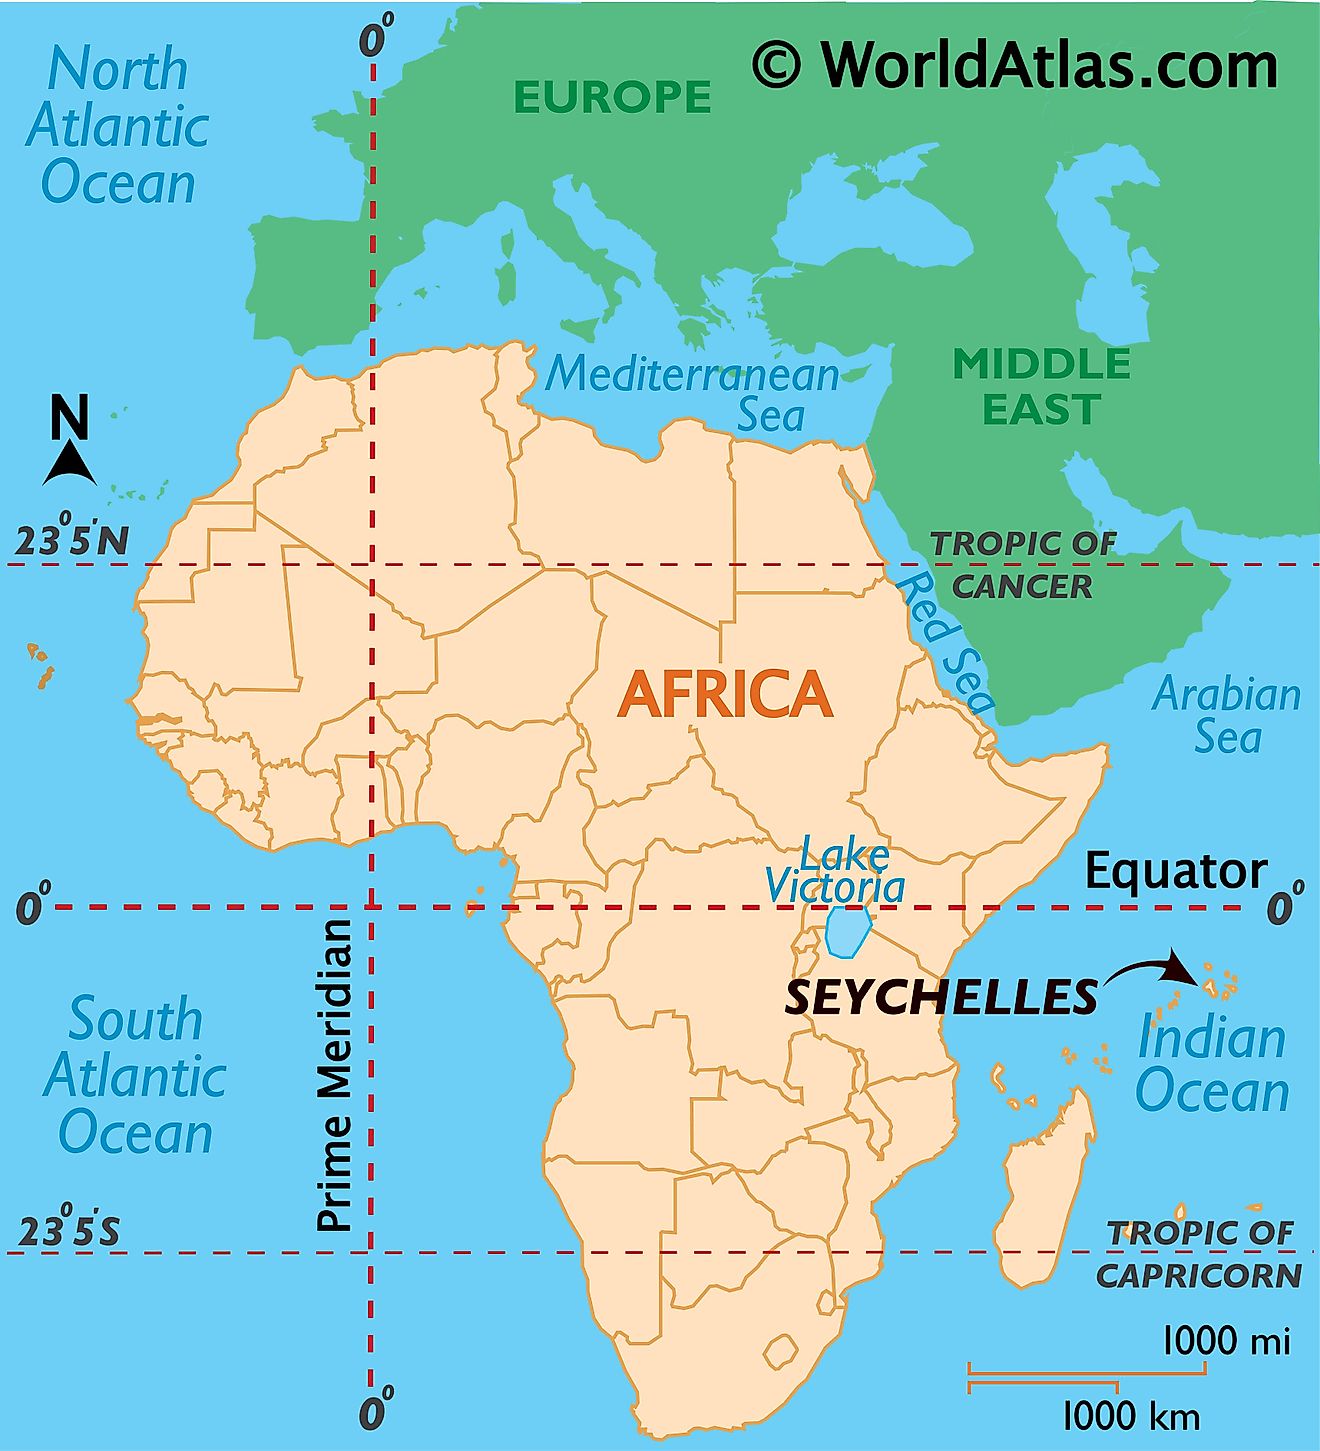 Location Of Canary Islands On World Map Seychelles Maps & Facts - World Atlas